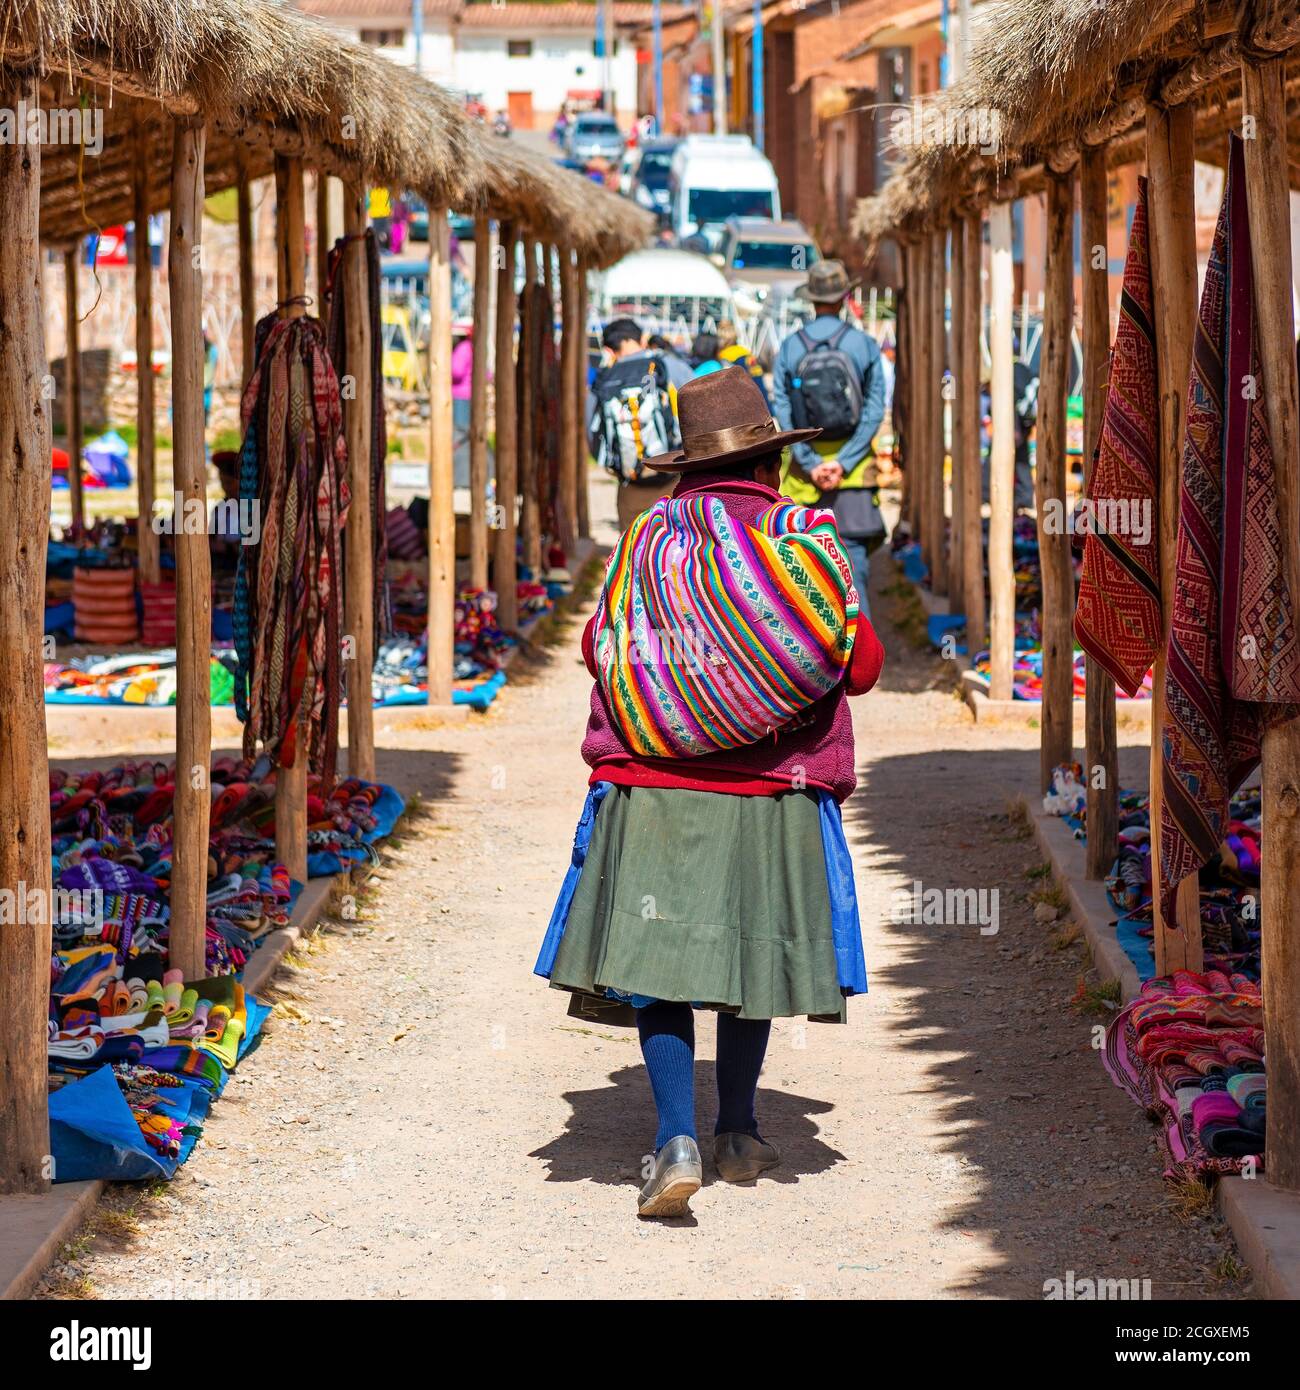 Peruvian indigenous Quechua woman with traditional textile walking on a fabric local market, Chinchero, Cusco province, Peru. Stock Photo